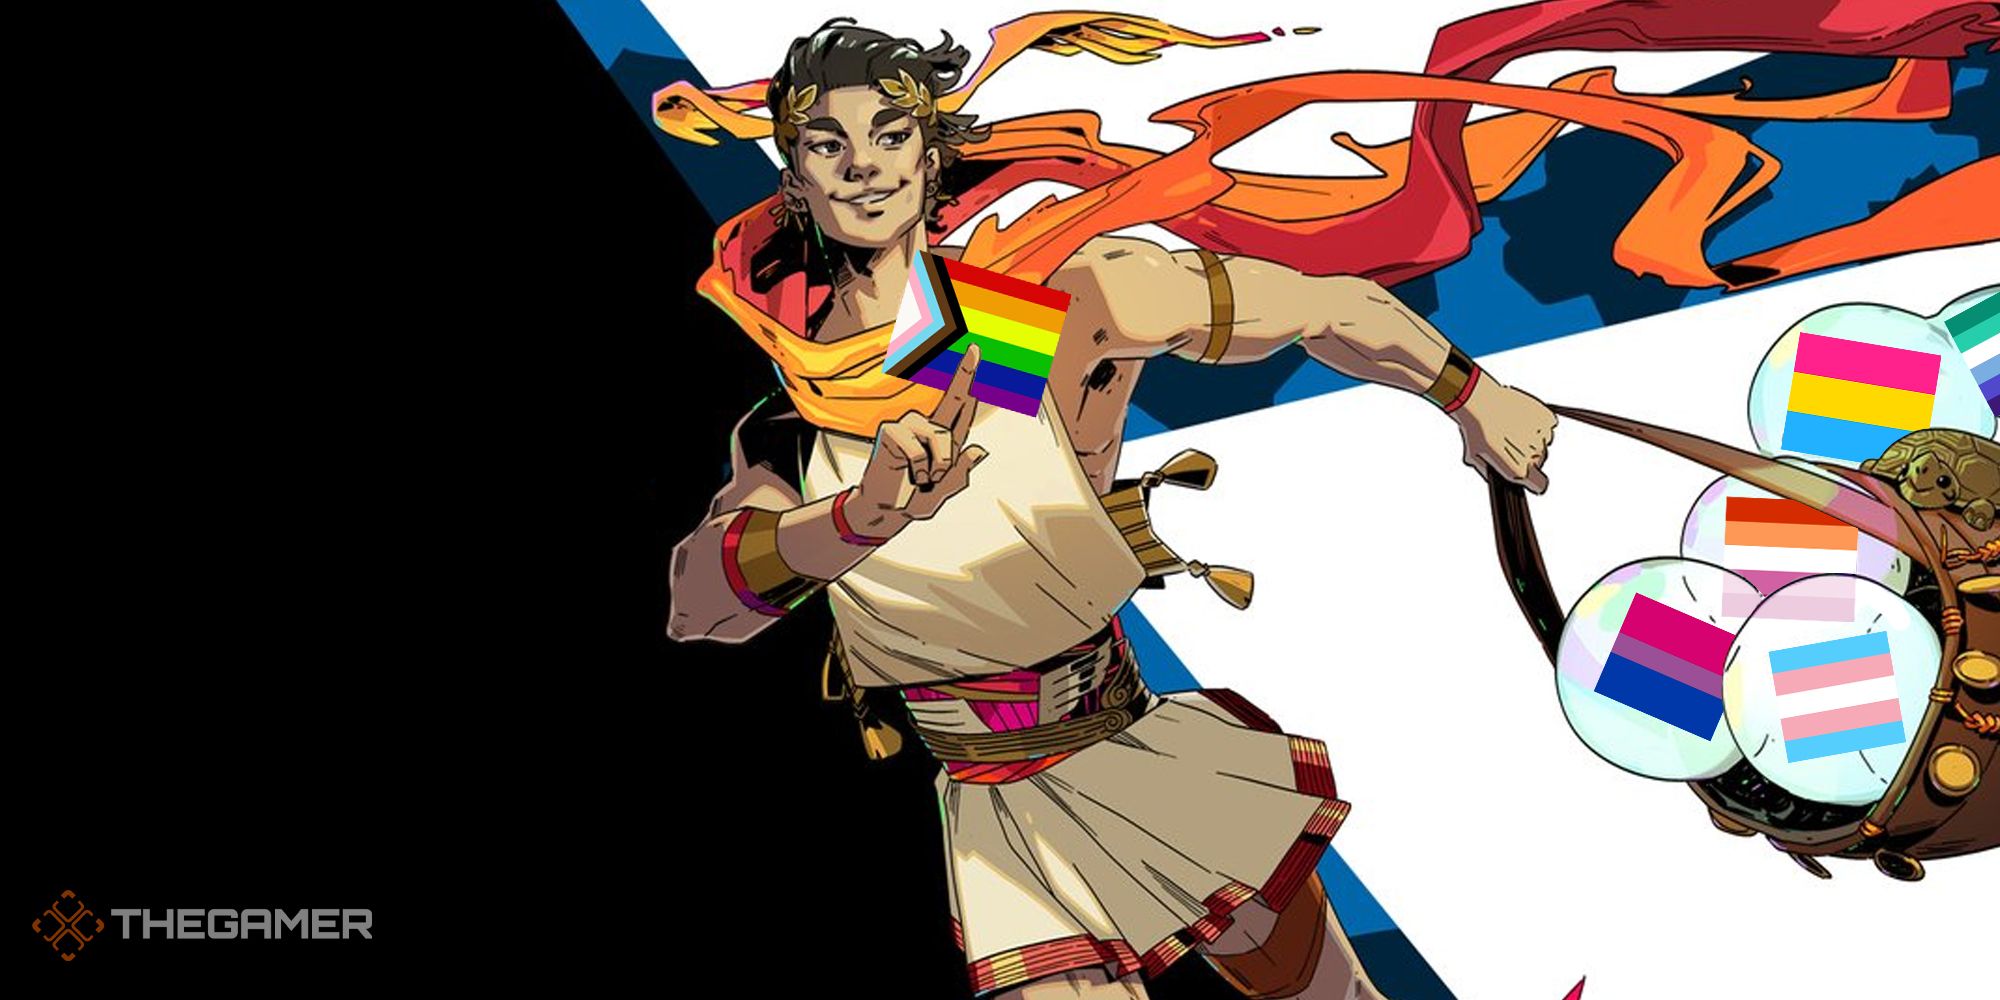 hermes in hades with a bag full of queer flags